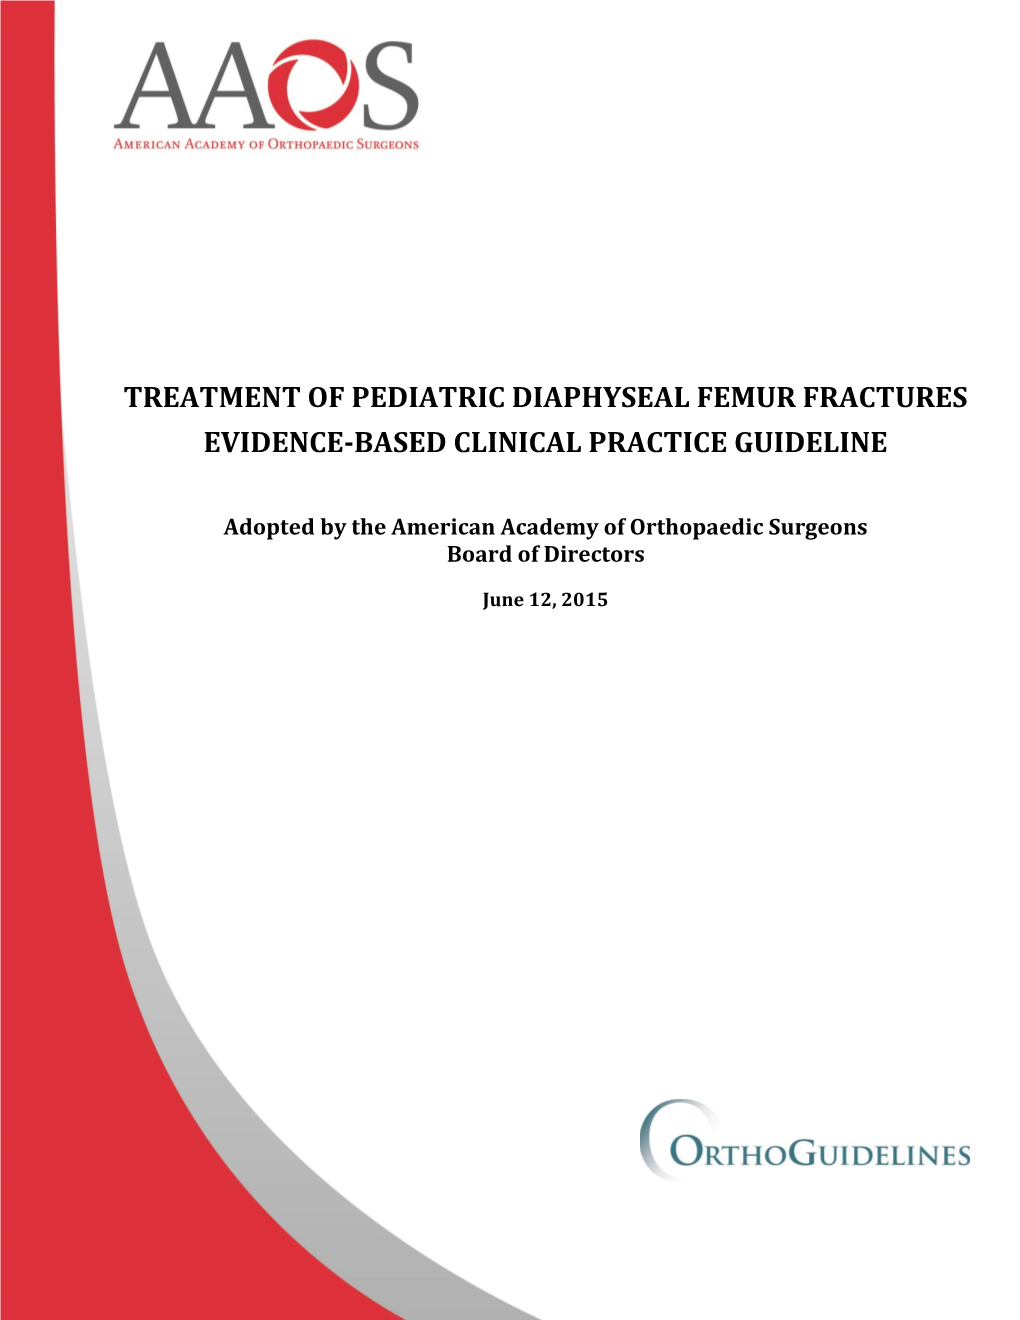 Treatment of Pediatric Diaphyseal Femur Fractures Evidence-Based Clinical Practice Guideline